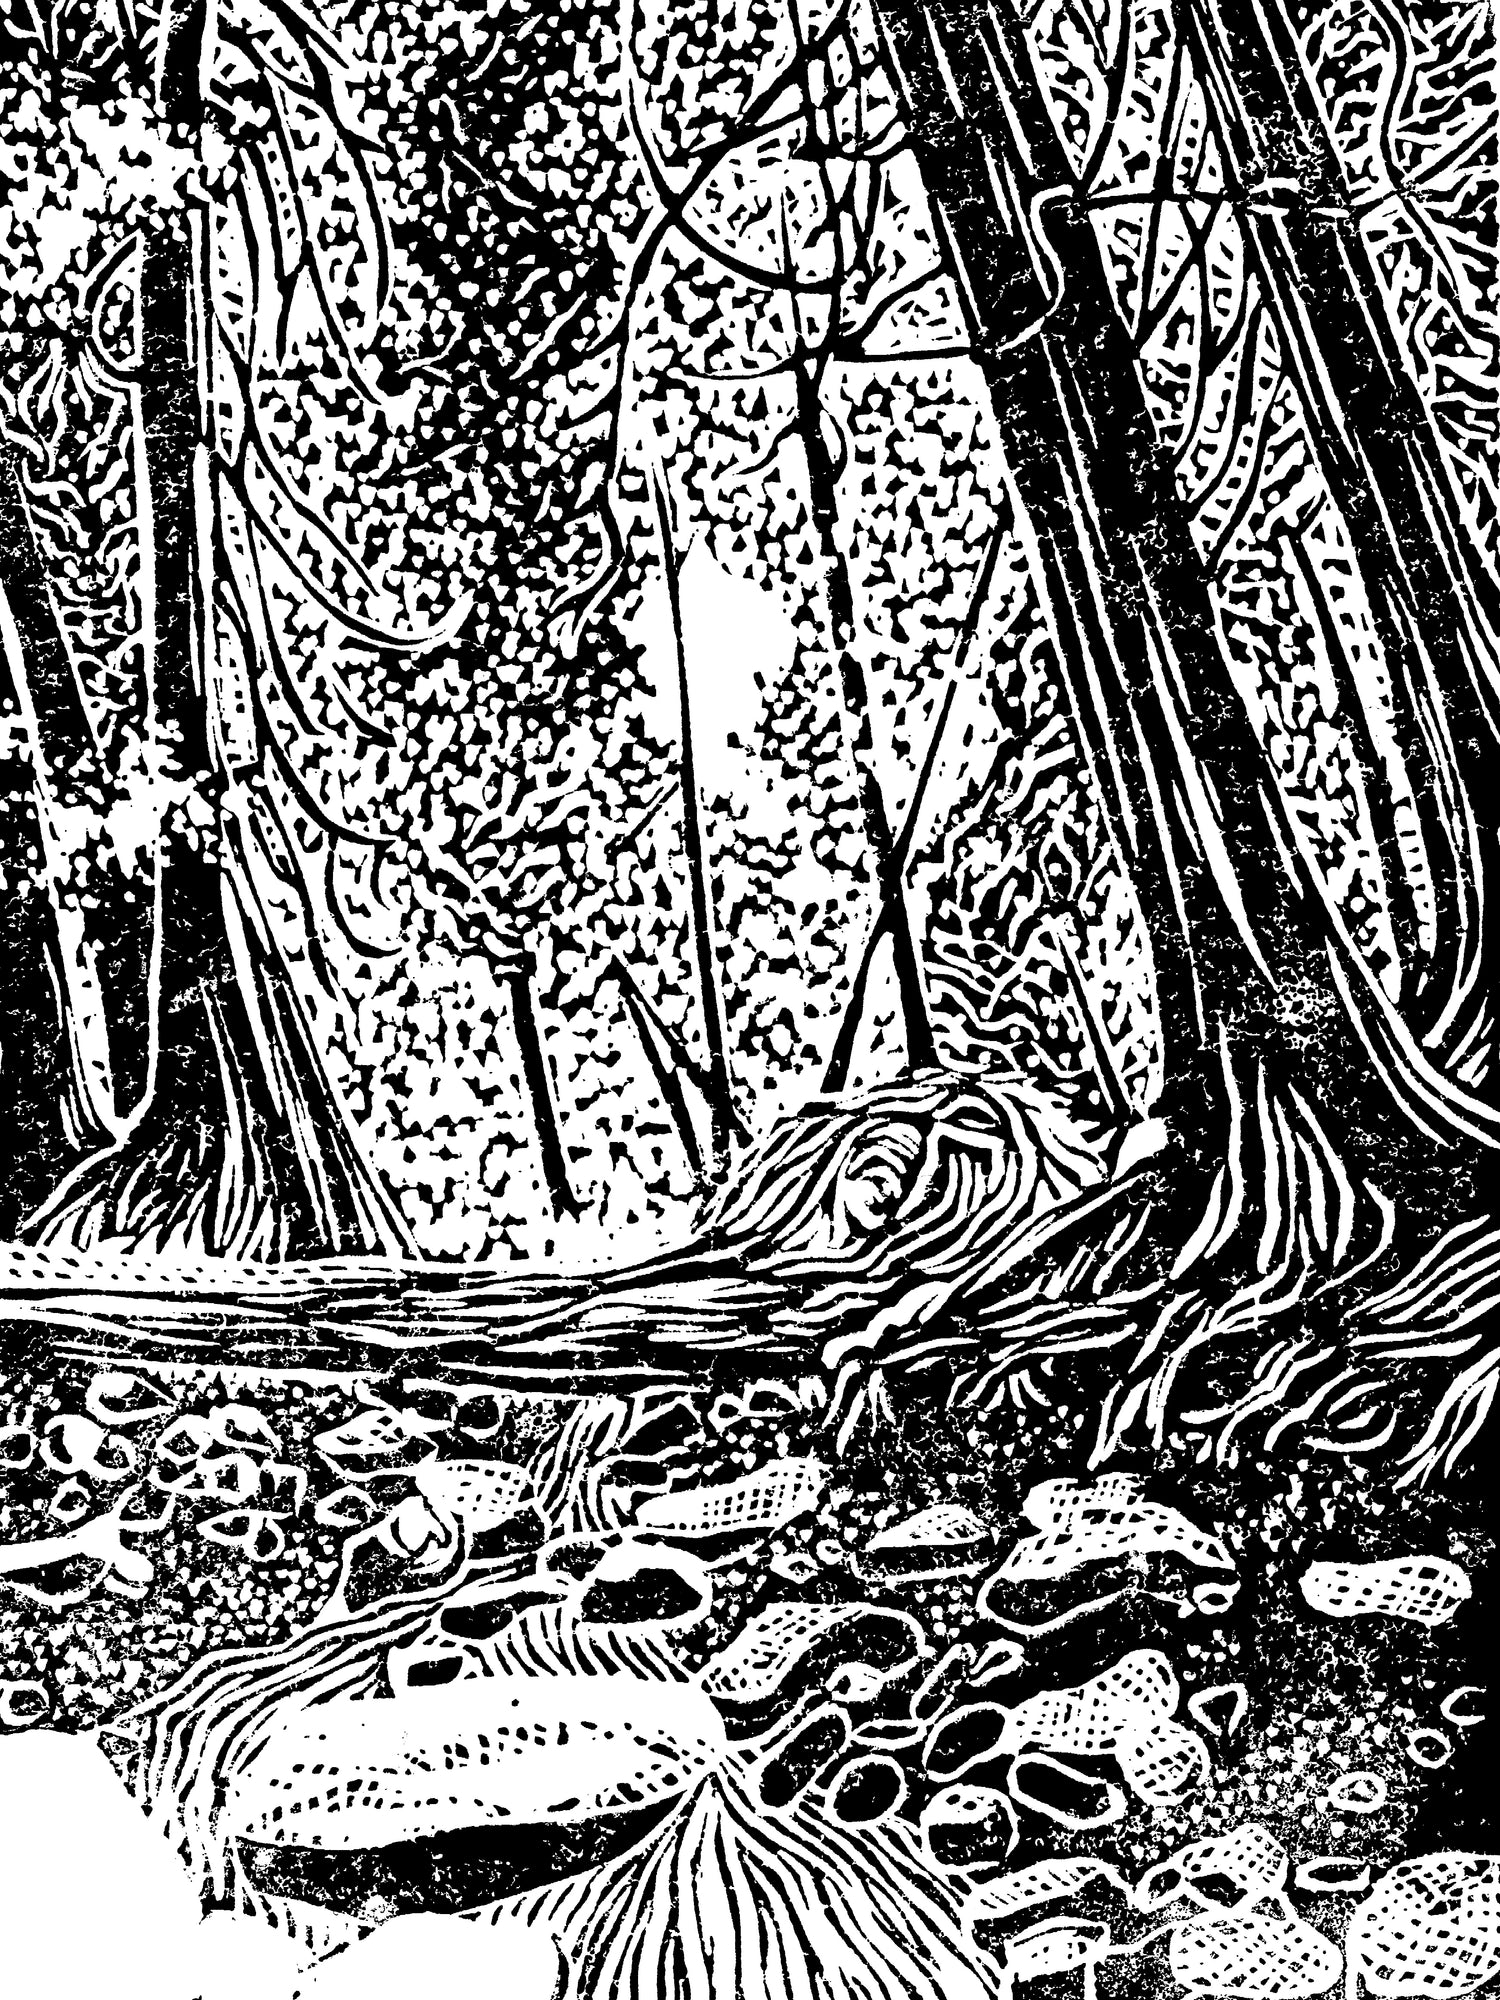 Black and white one-color linoleum block print of a bubbling brook in a cedar forest with a fallen cedar tree and stones in the water's path.